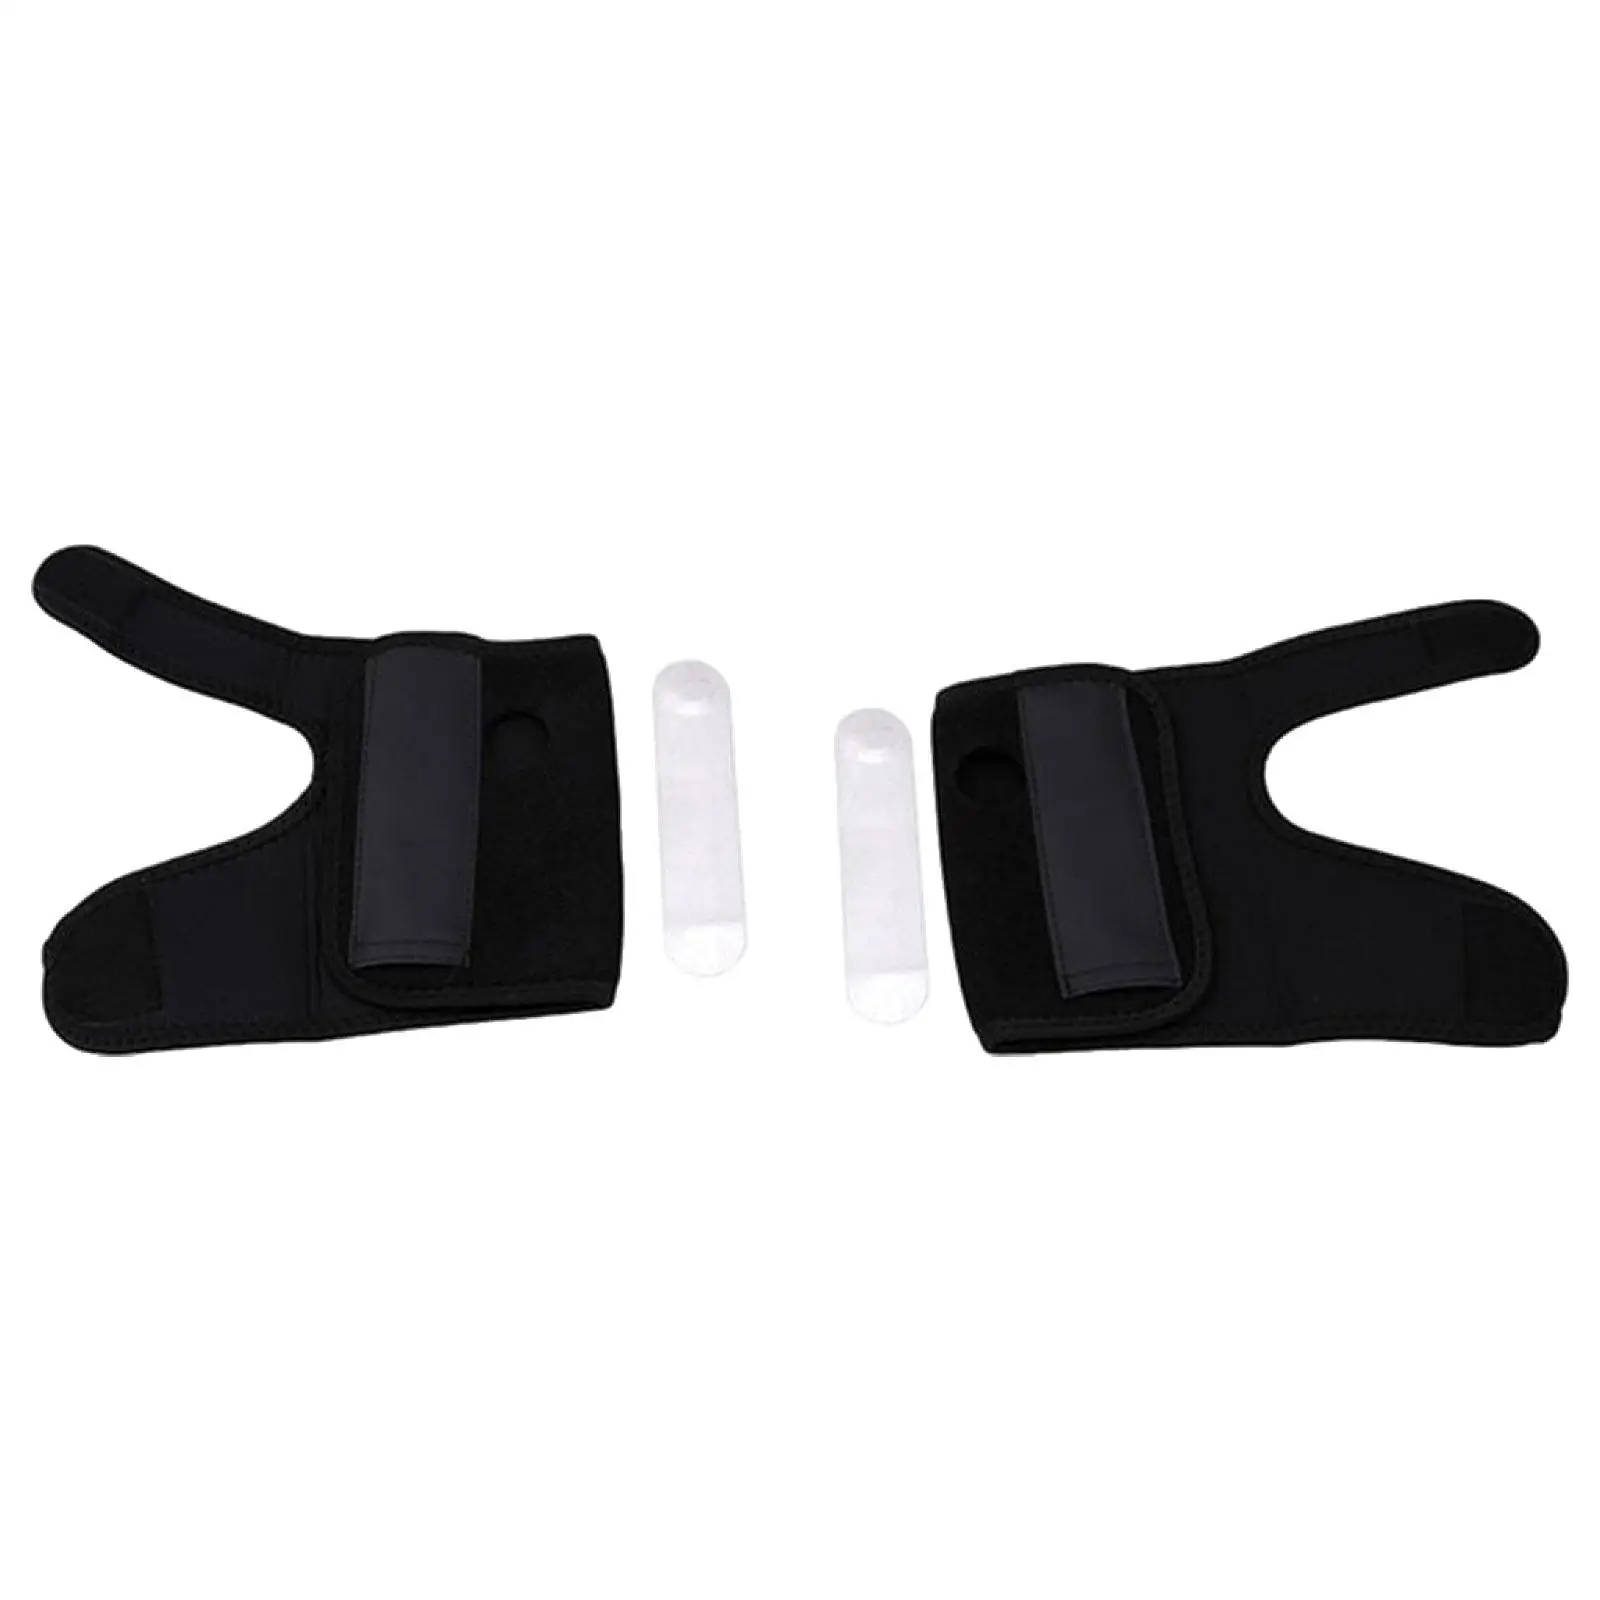 

Wrist Brace Wrist Guard Wrist Protection Sleeve Wrist Compression Strap for Men Women Workout Badminton Fitness Working Out